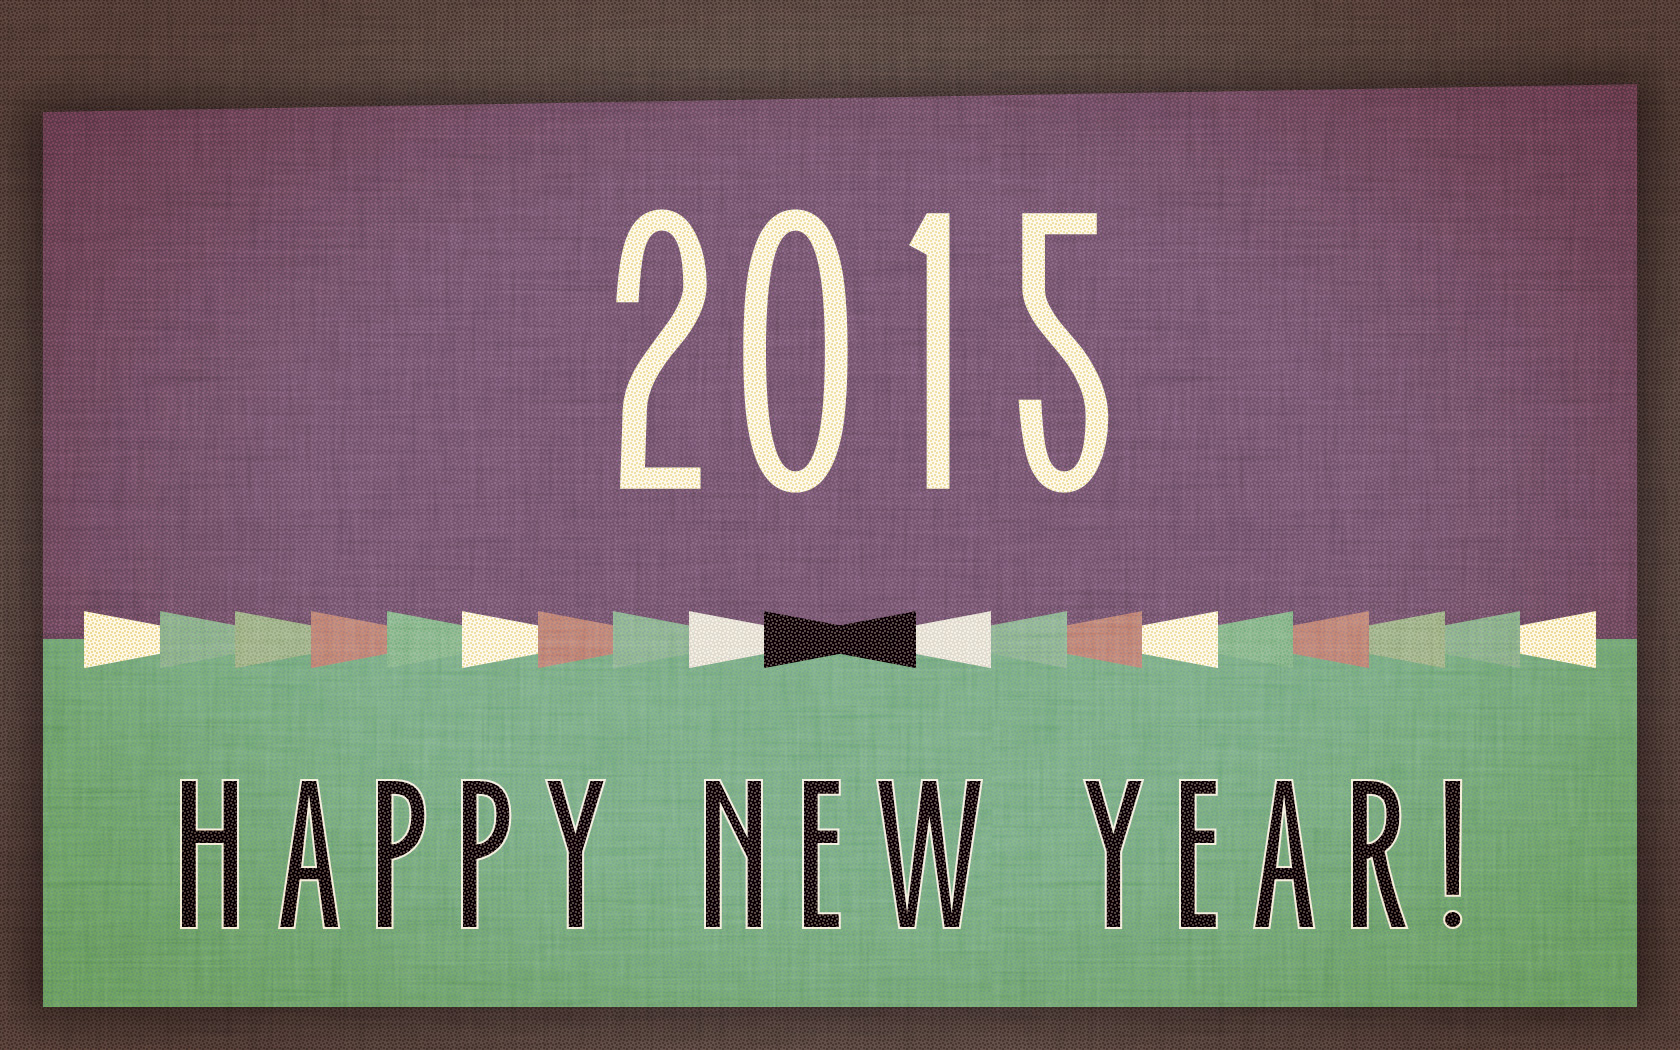 Happy-New-Year-2015-Wallpaper-Vintage small